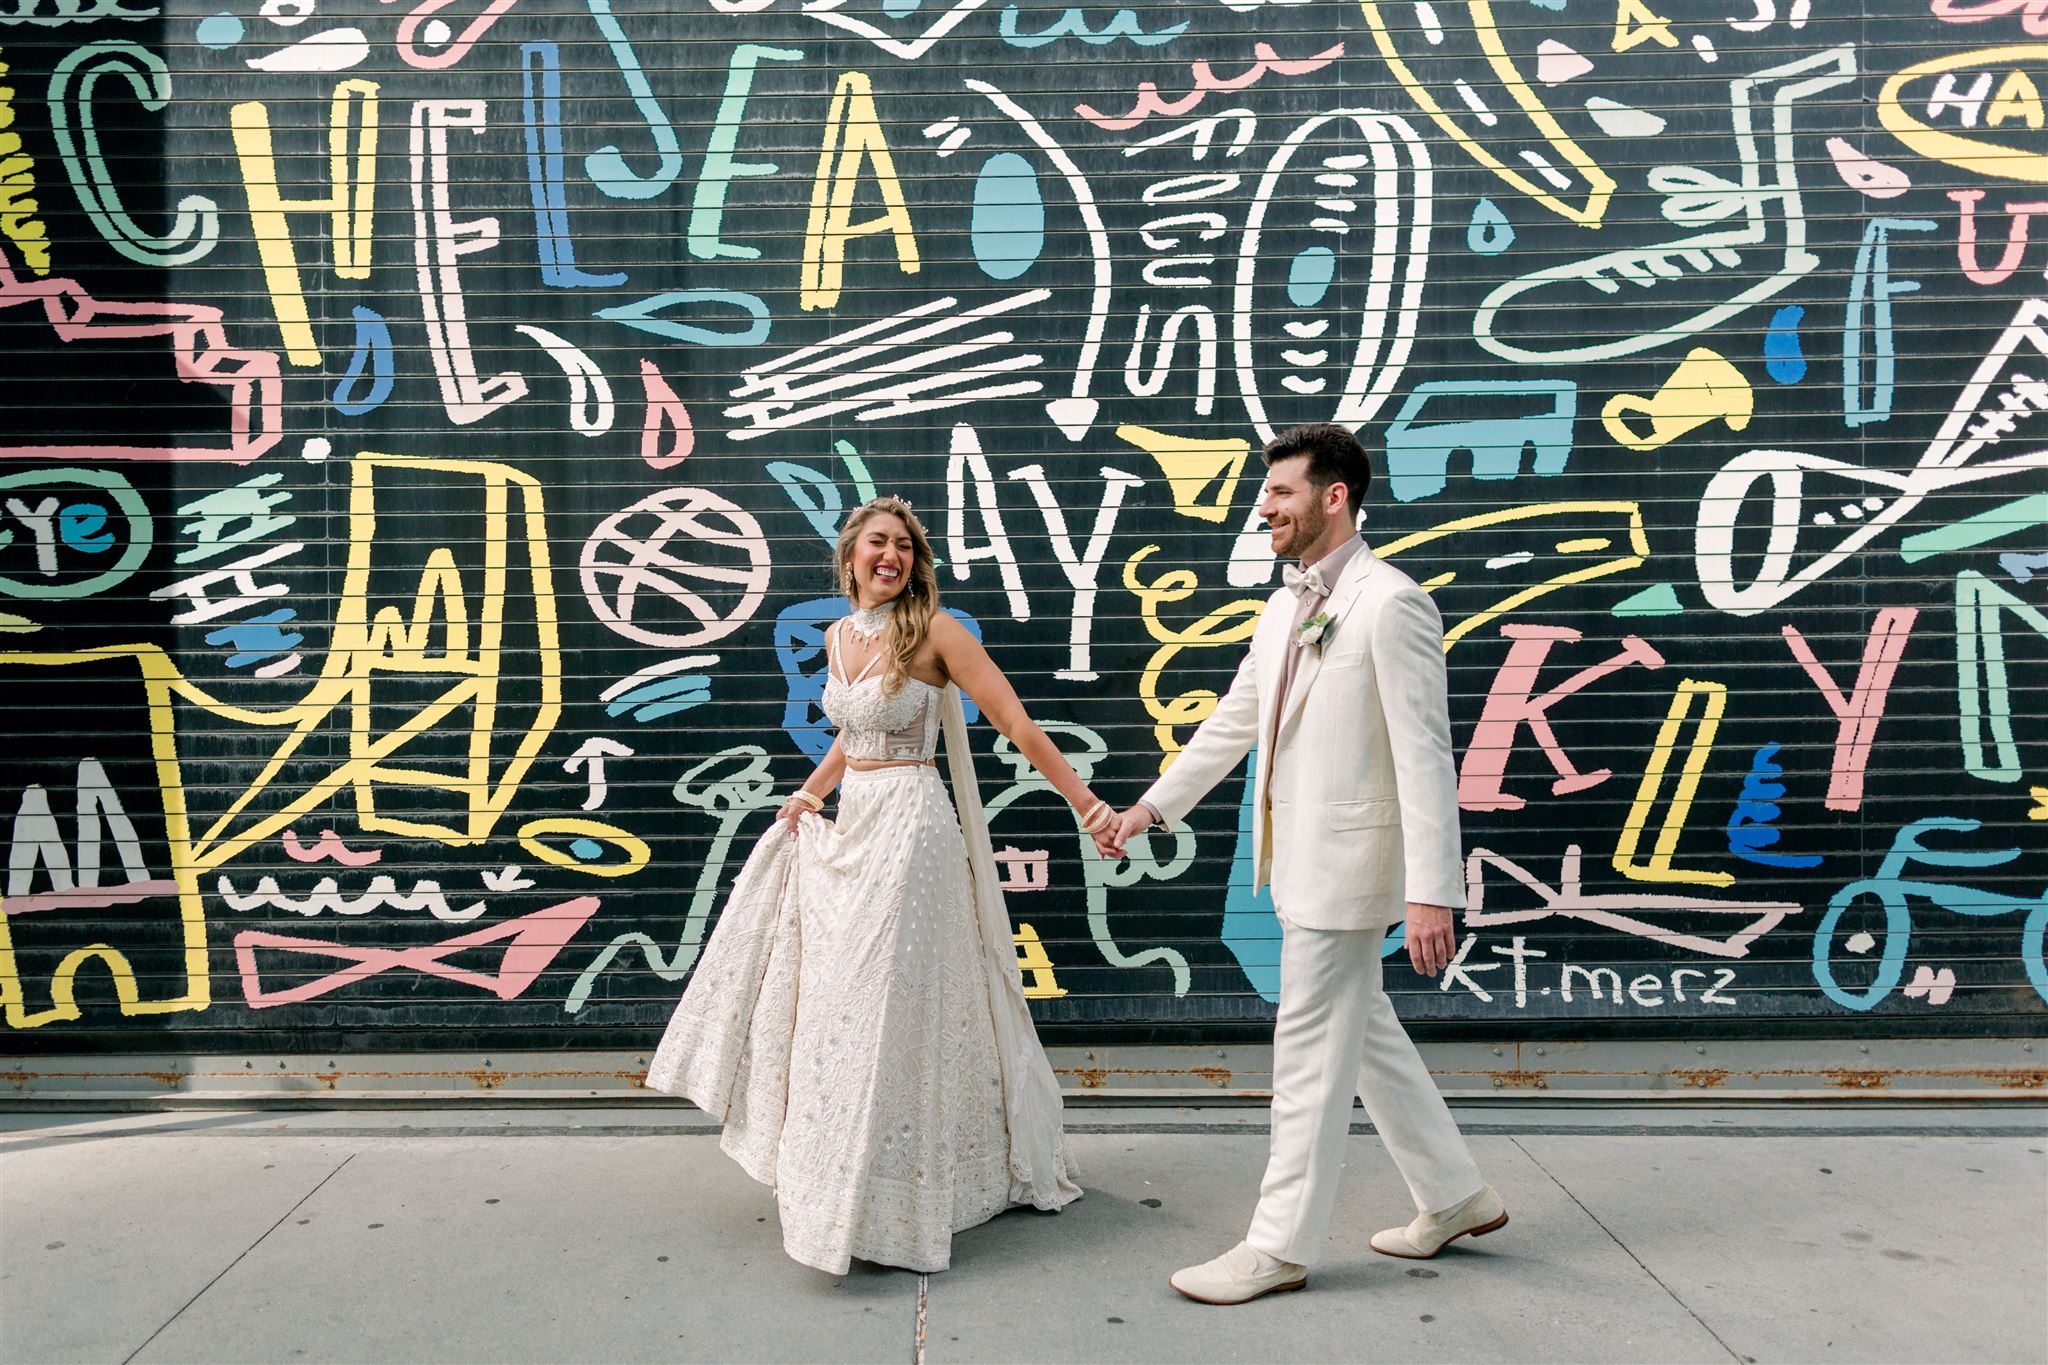 Bride and groom in white walking hand in hand in front of a colorful mural in New York City on their wedding day